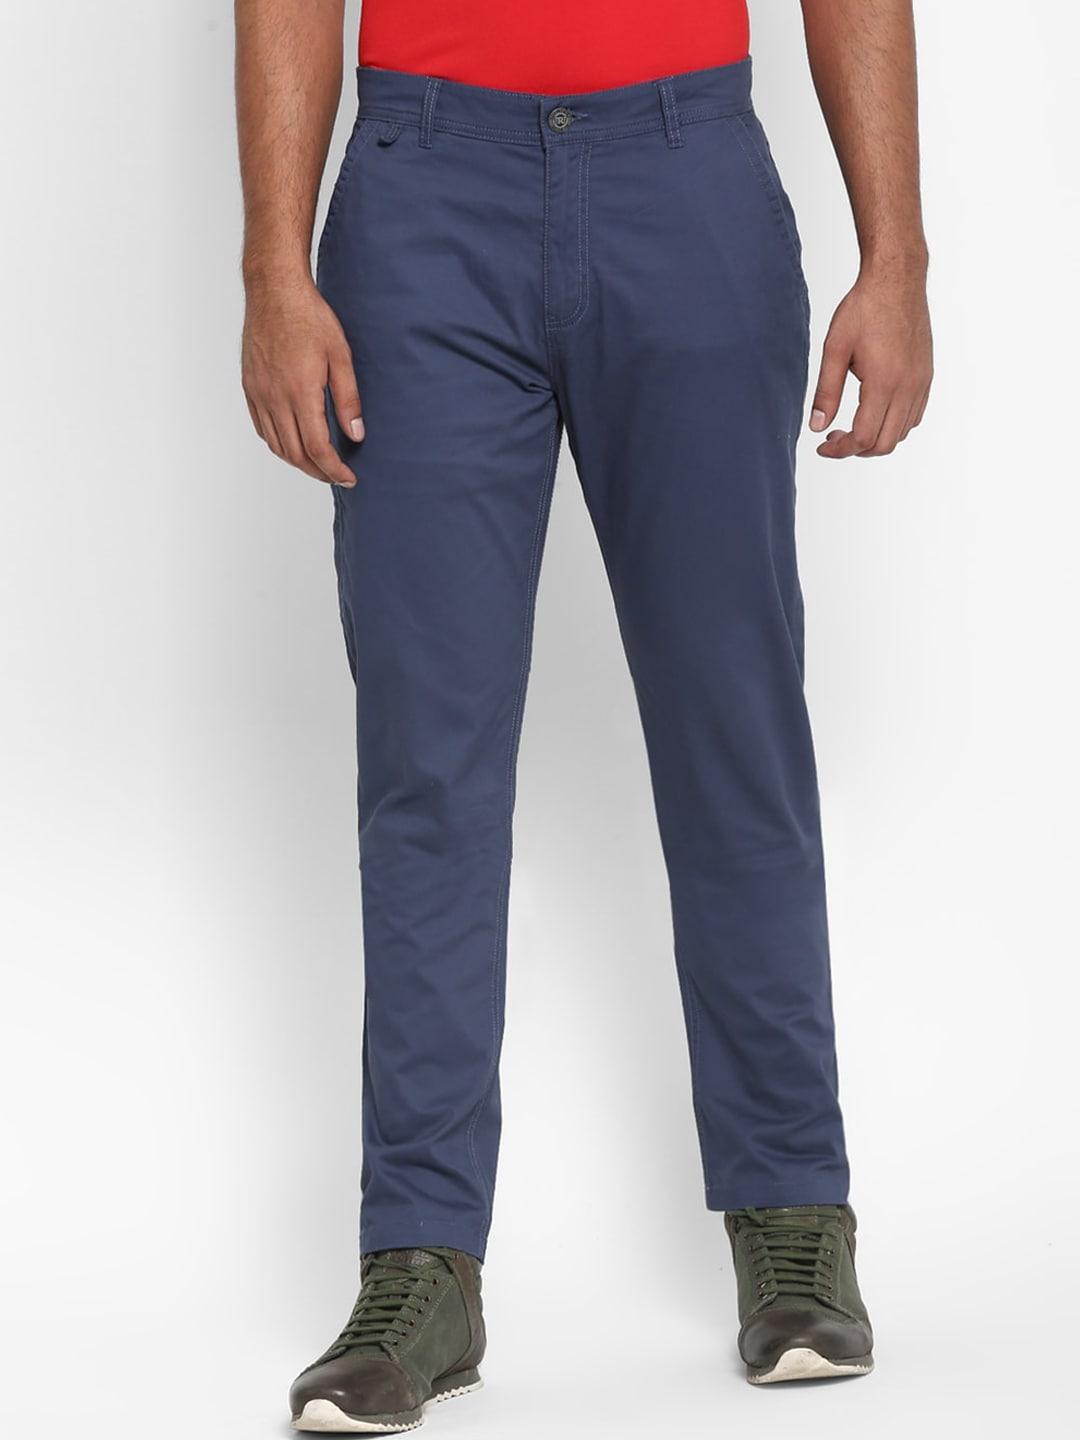 royal-enfield-men-blue-chinos-trousers